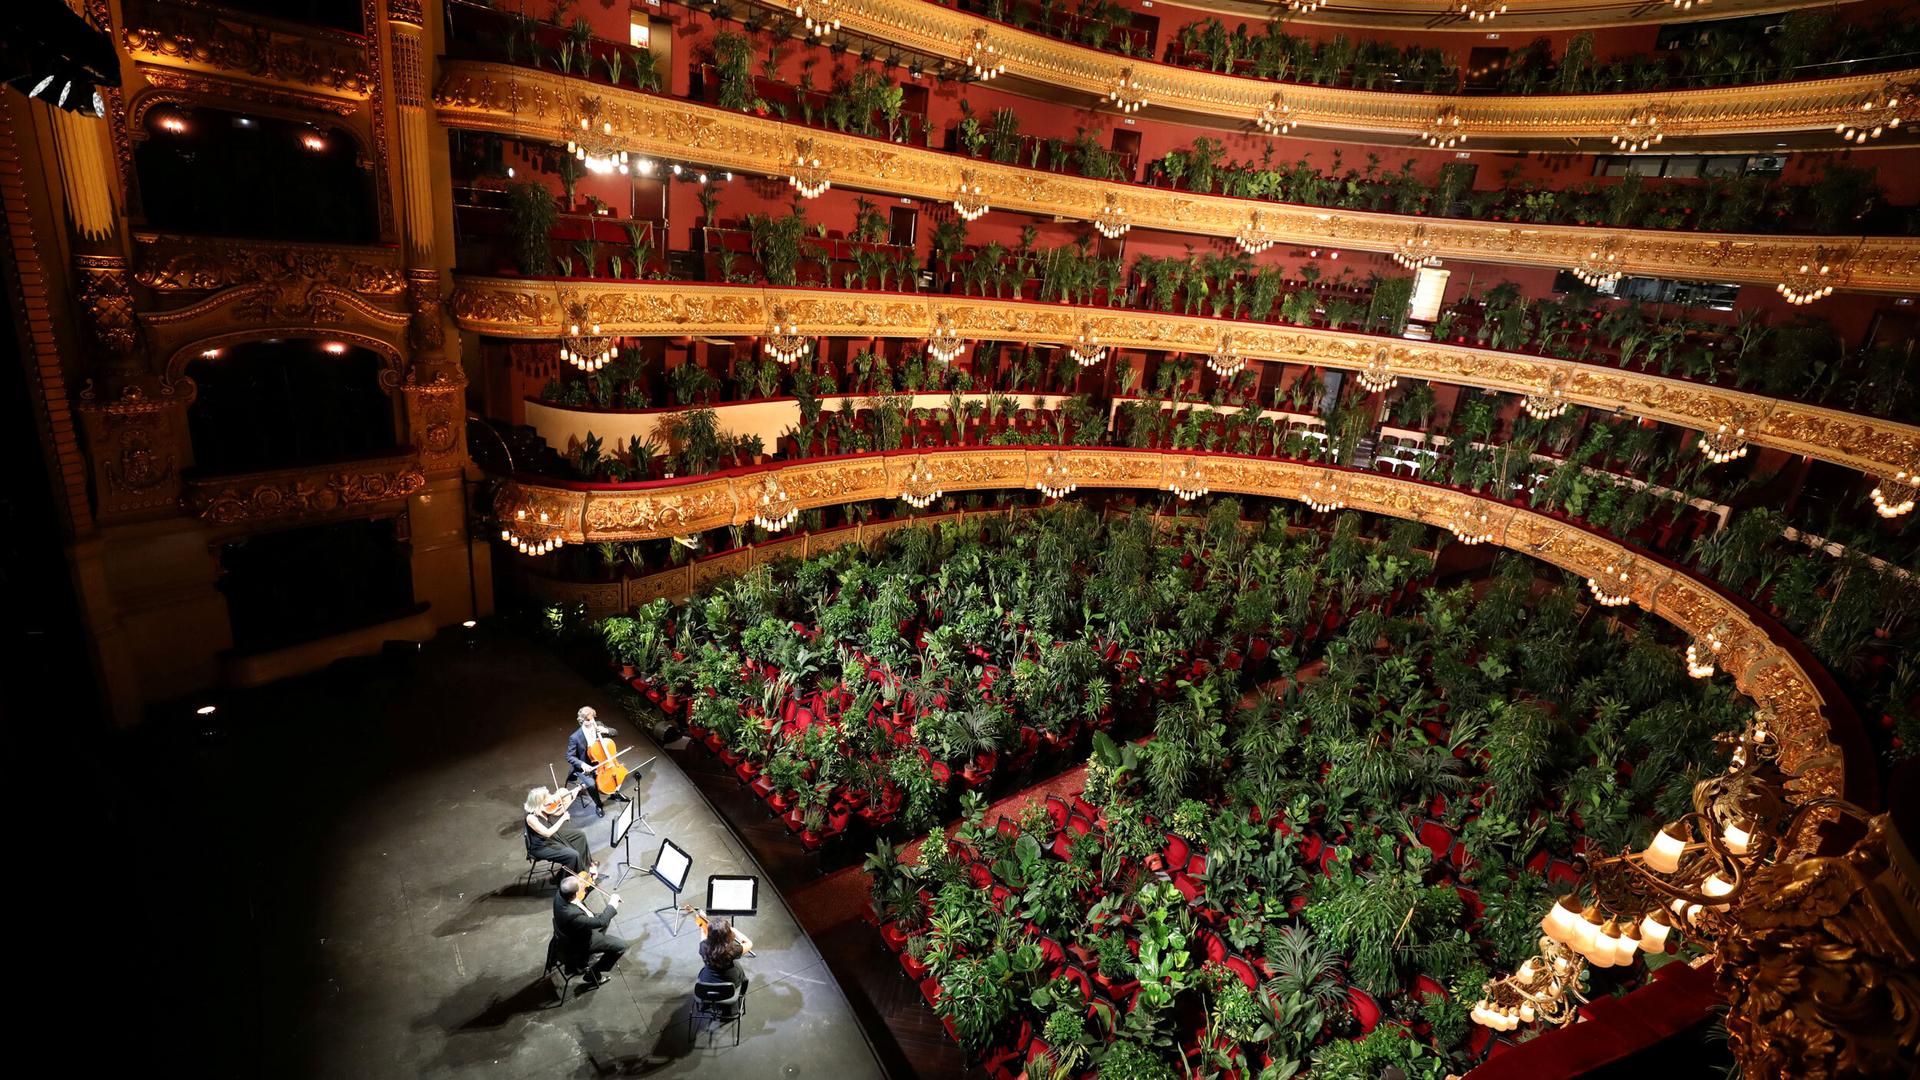 a theater. with red carpet is full of plants instead of an audience.